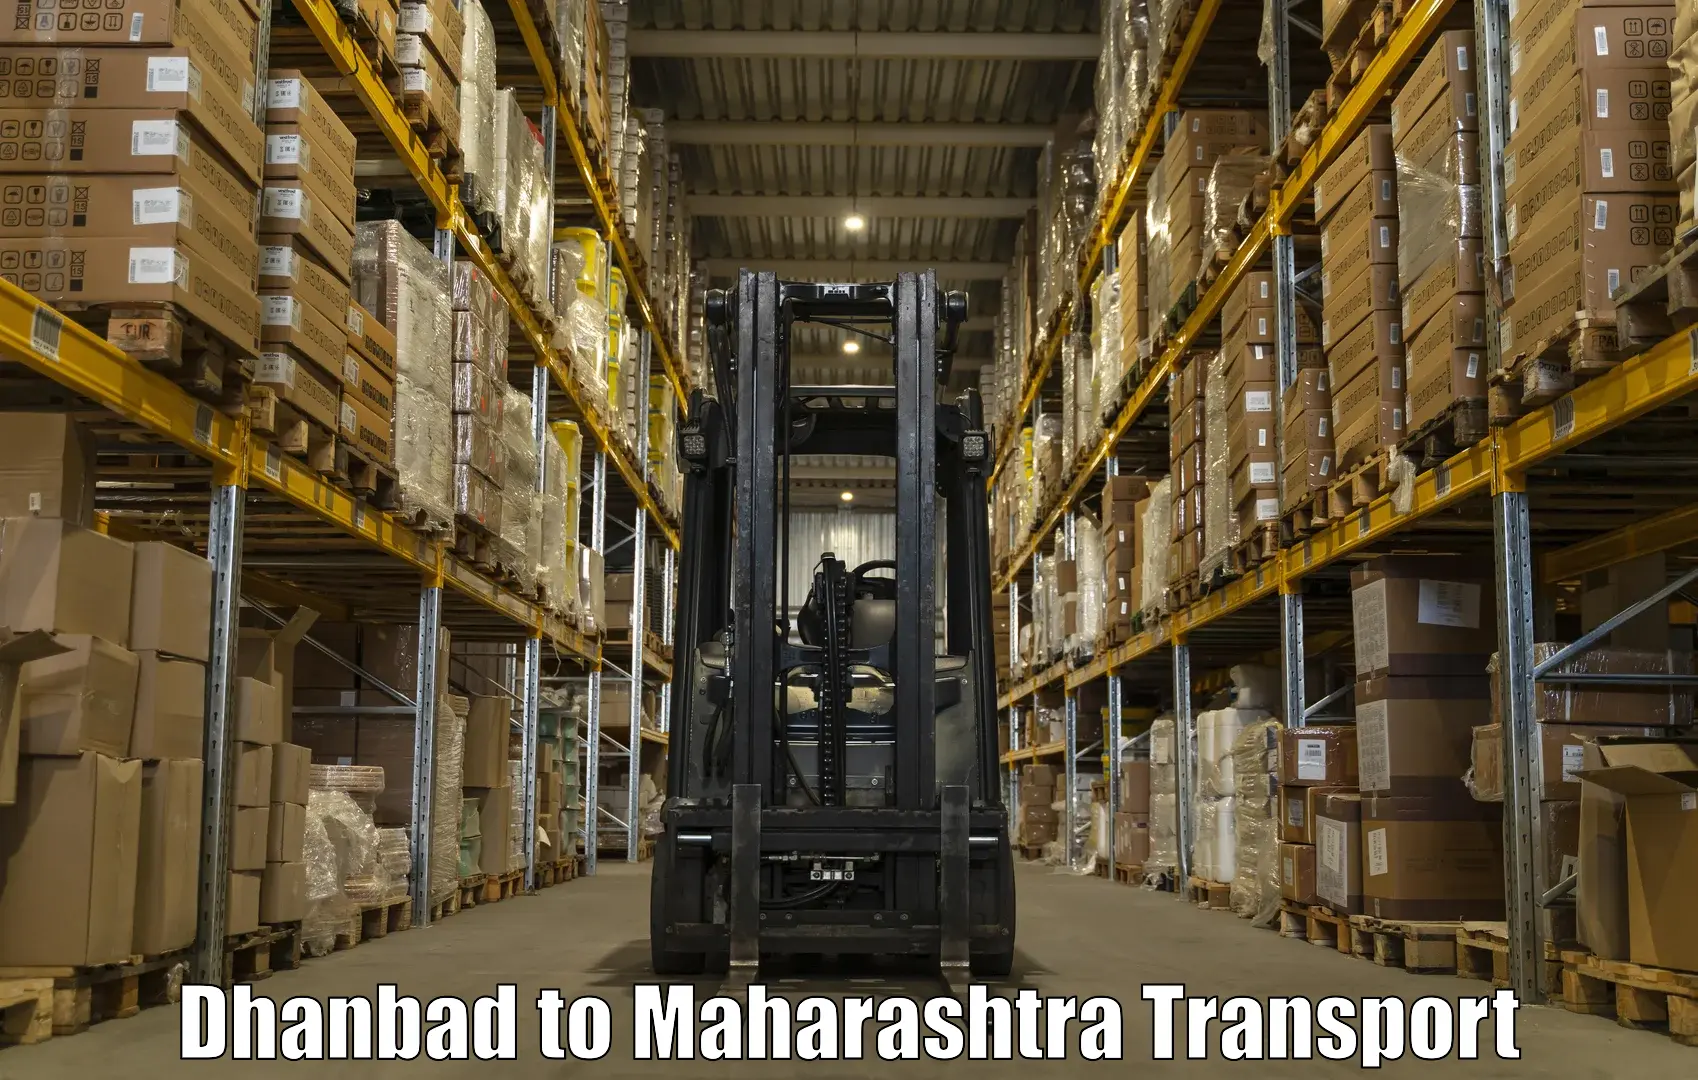 Transport shared services in Dhanbad to Borivali